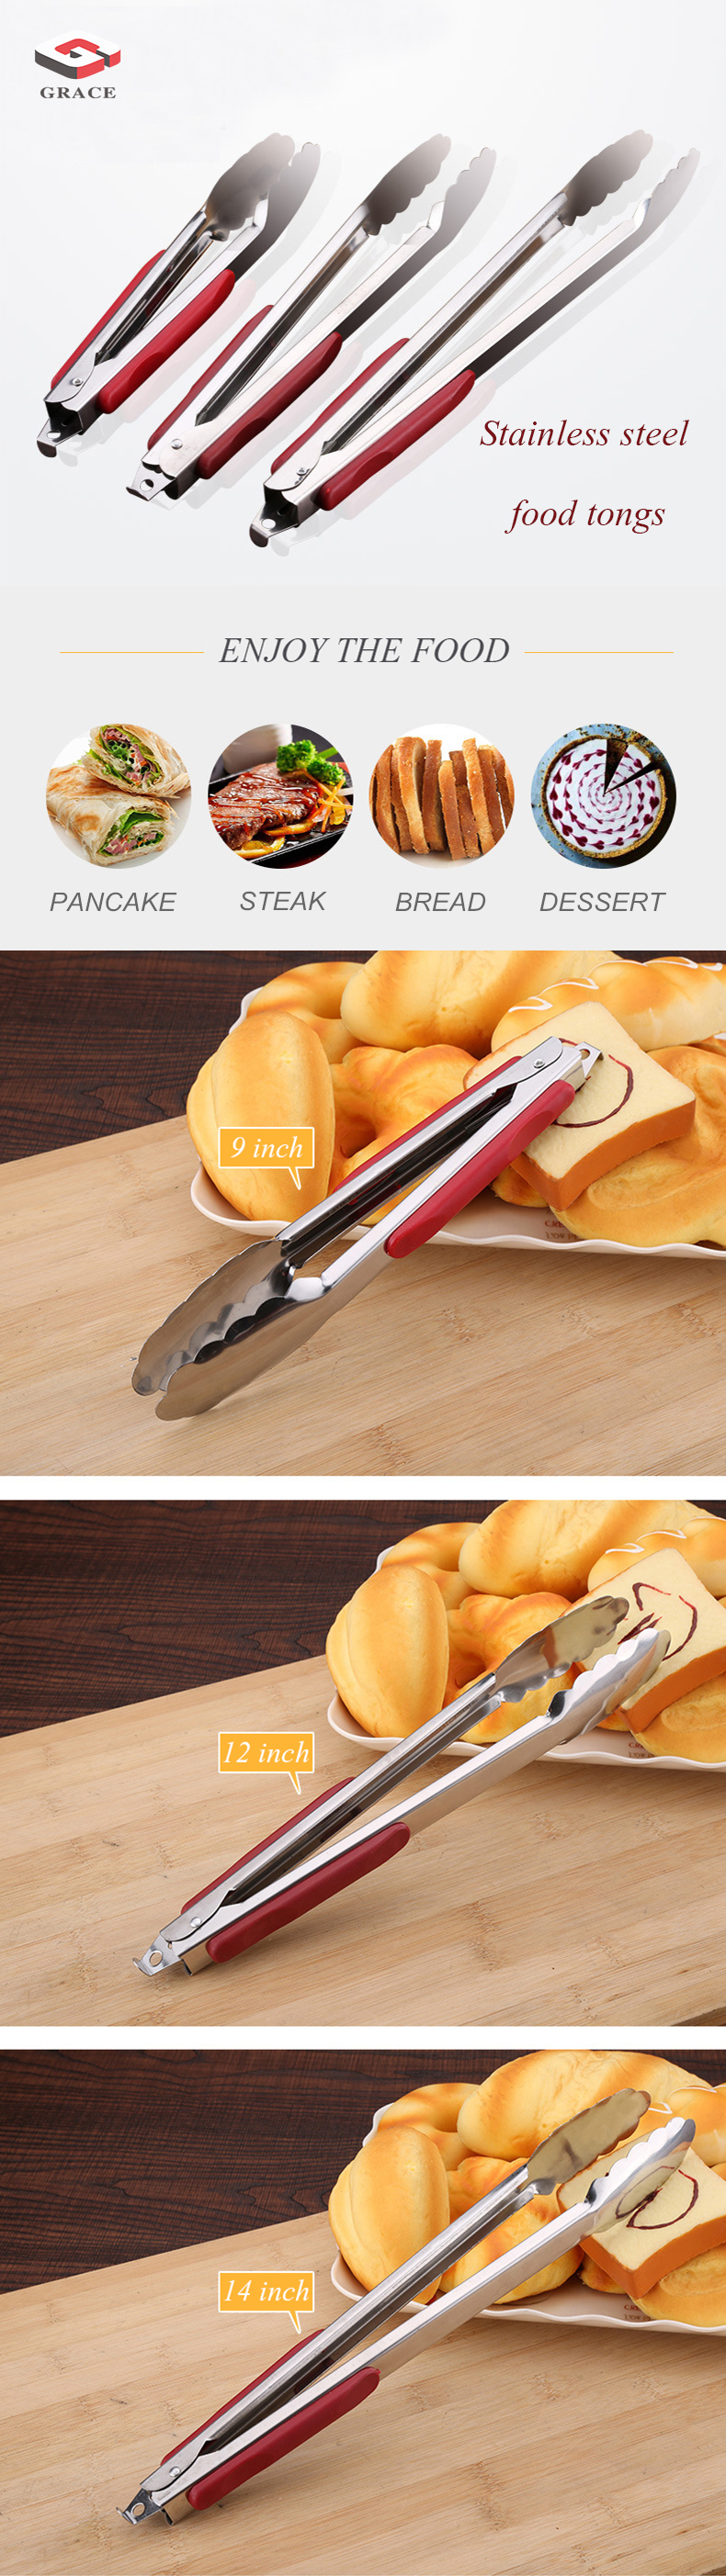 Multi-function Buffet serving utensils Salad BBQ Pasta Stainless Steel Food Clamp Serving Tongs